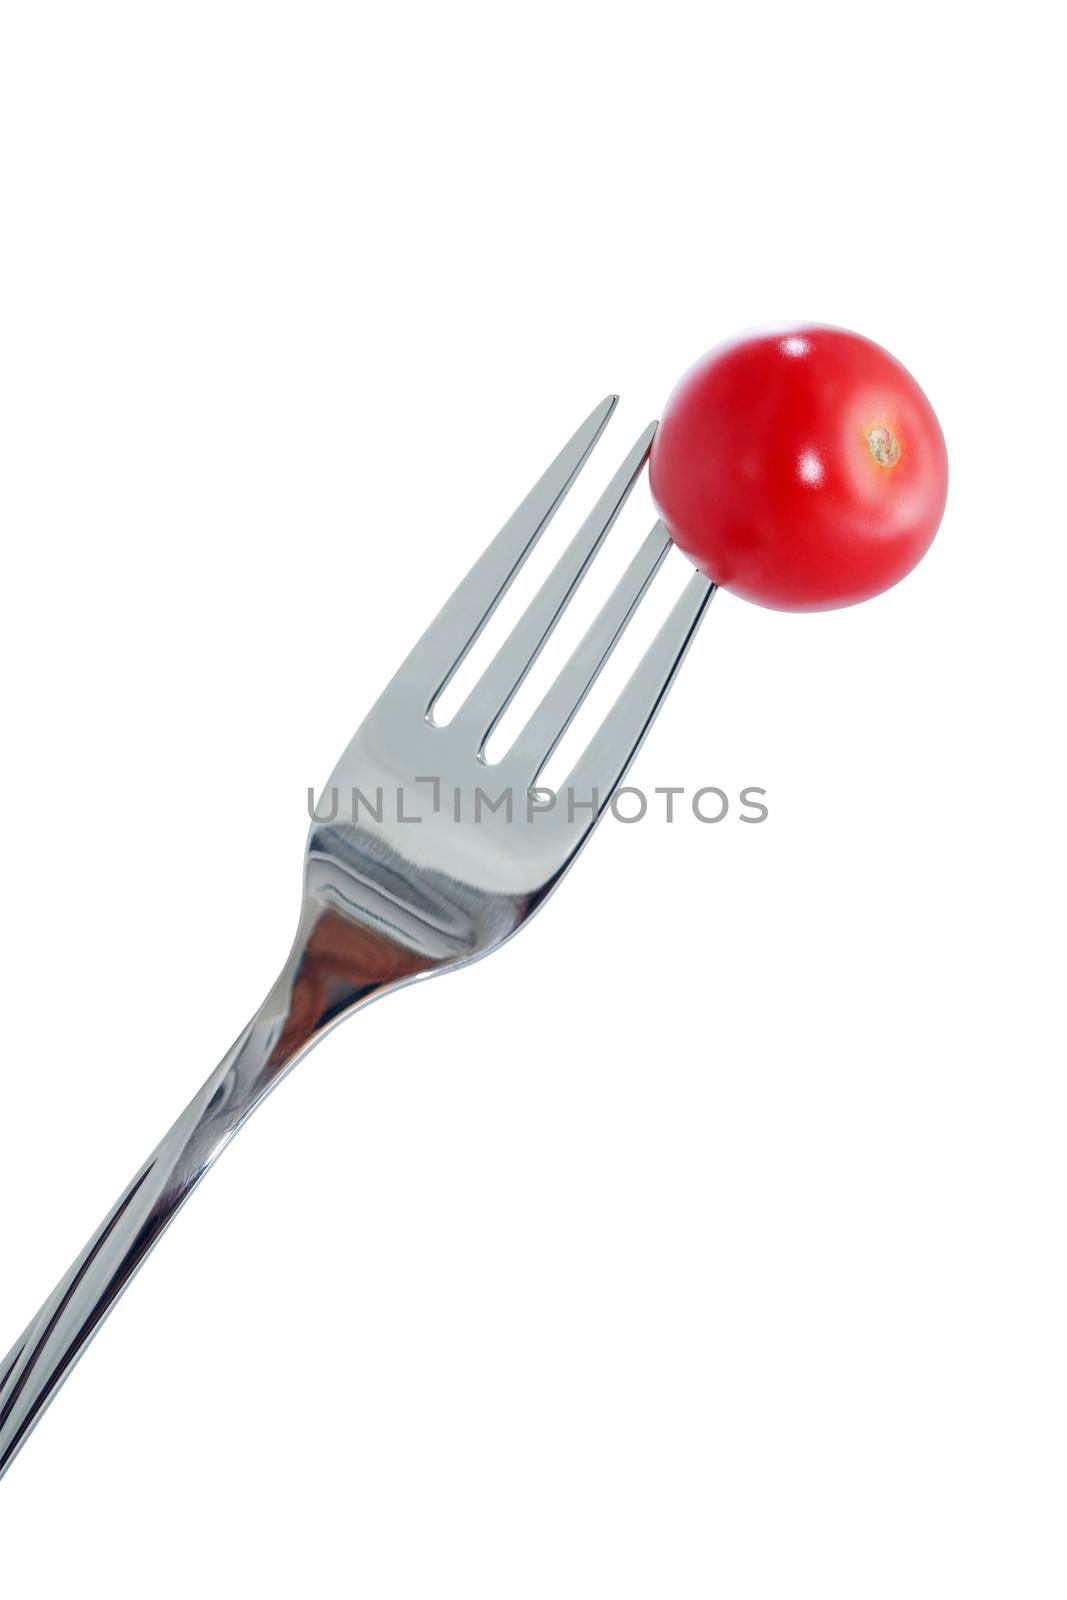 Cherry tomato on fork. Isolated on white with clipping path